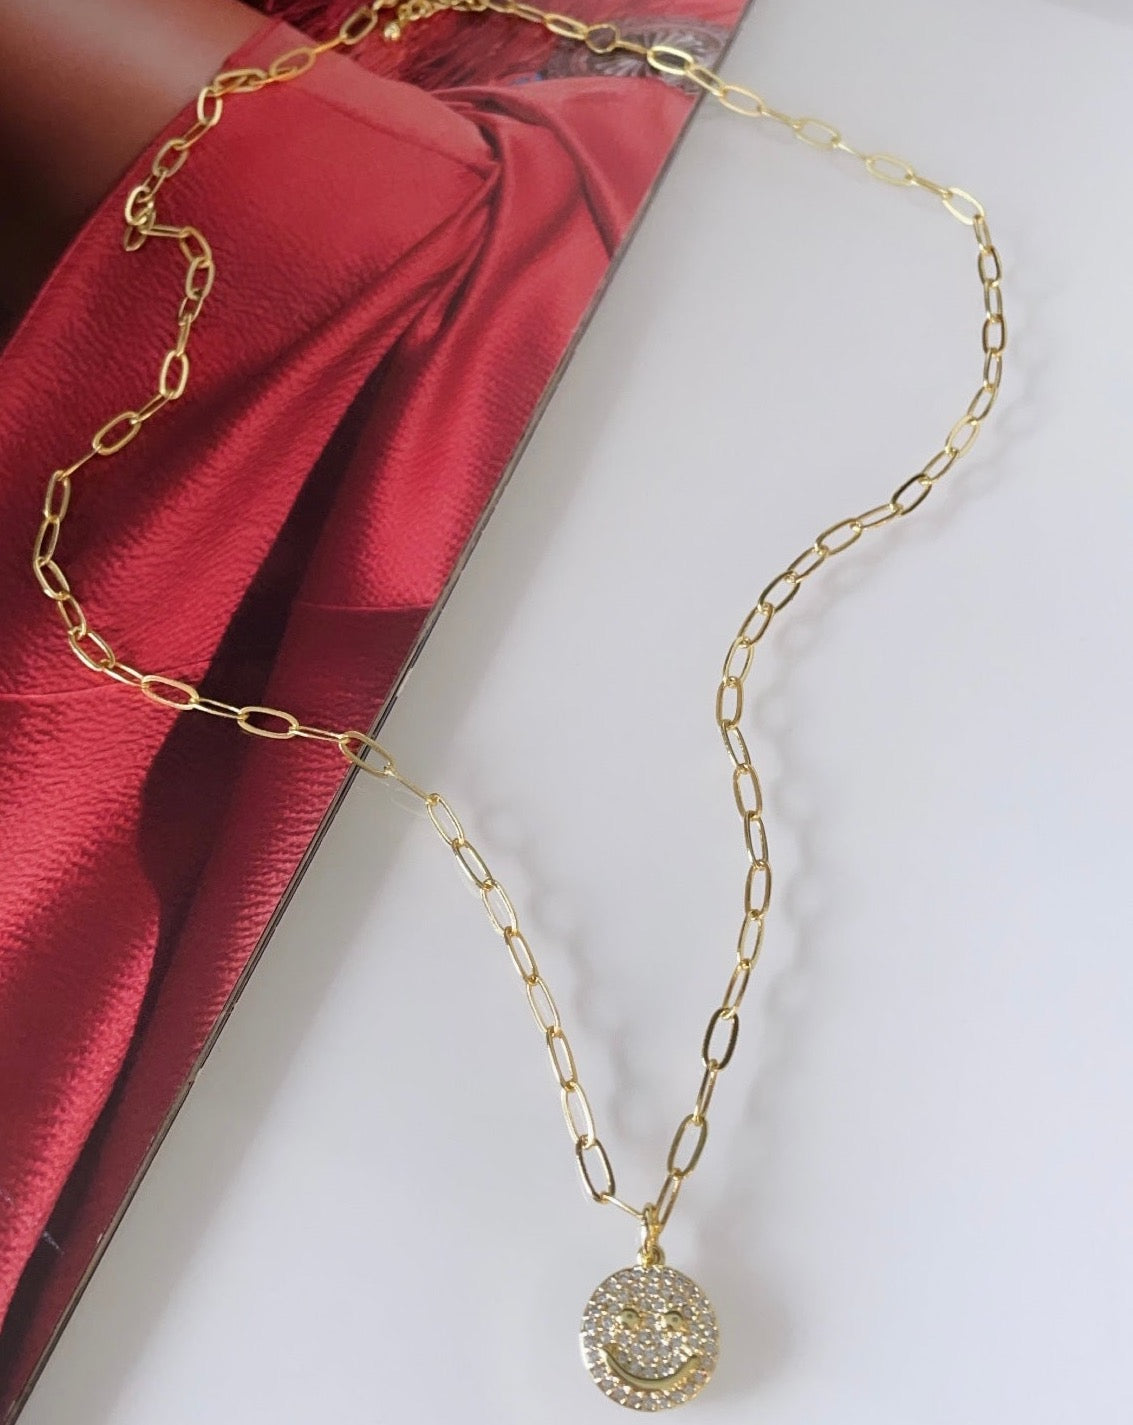 Gold Happy Face Necklace - LimaLimón Store